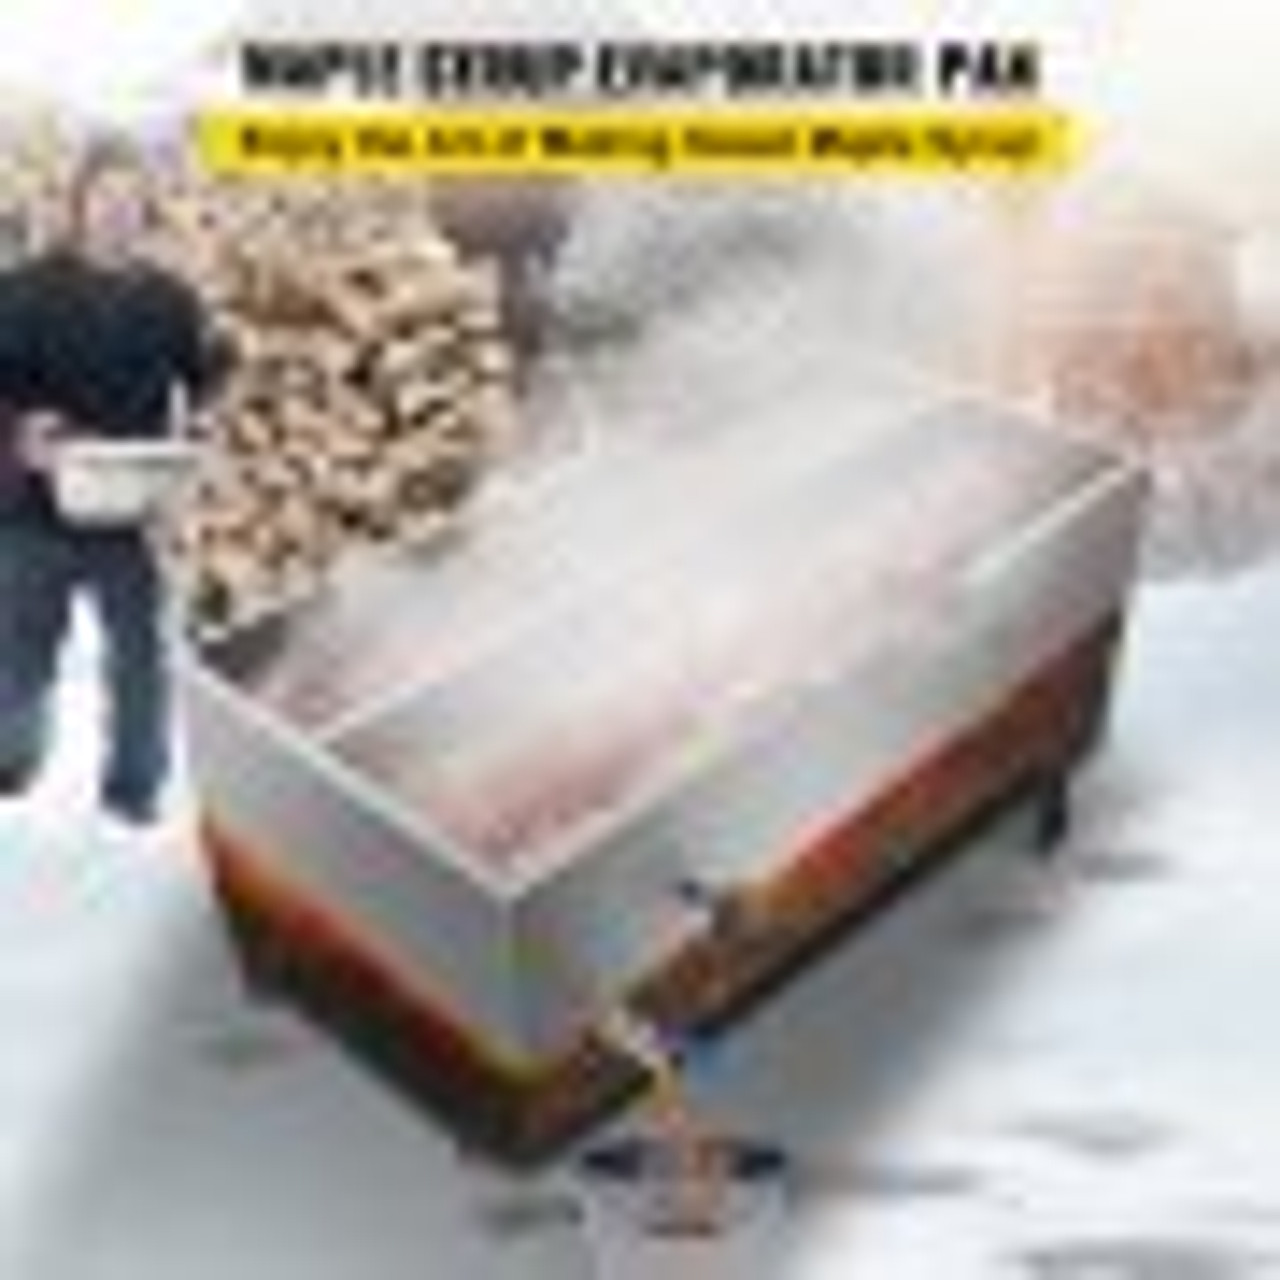 Maple Syrup Evaporator Pan 48x24x9.4 Inch Stainless Steel Maple Syrup Boiling Pan with Valve and Thermometer and Divided Pan